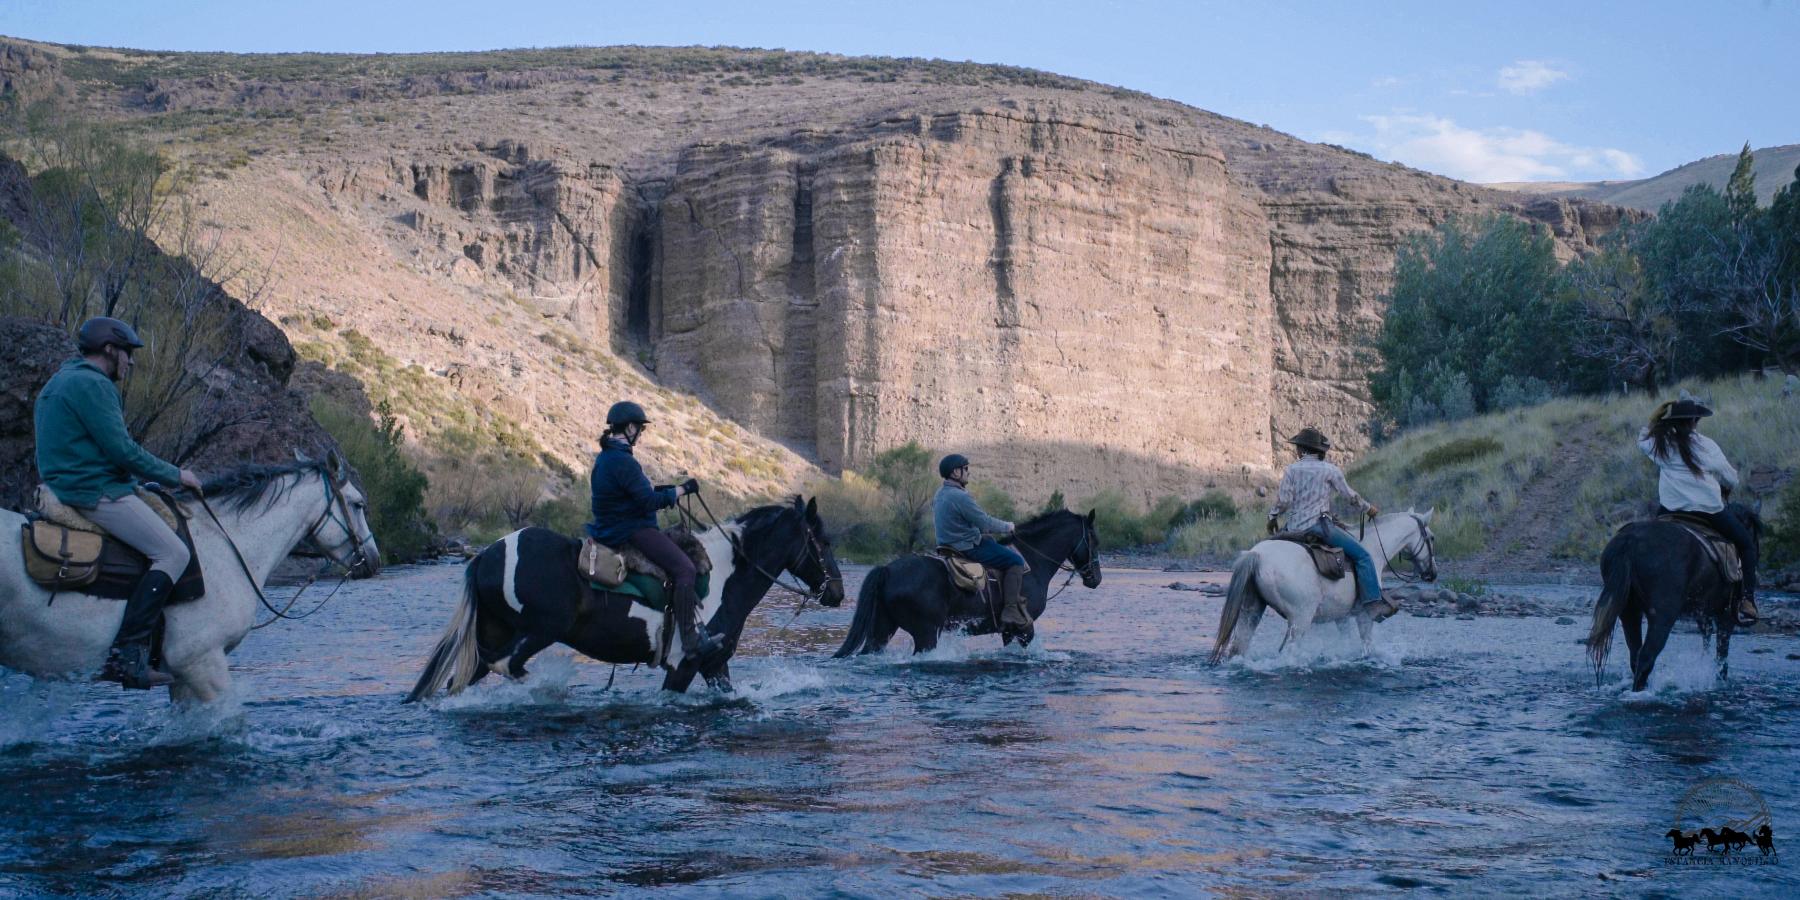 Riders on horseback crossing the river on the approach to Estancia Ranquilco in Patagonia Argentina